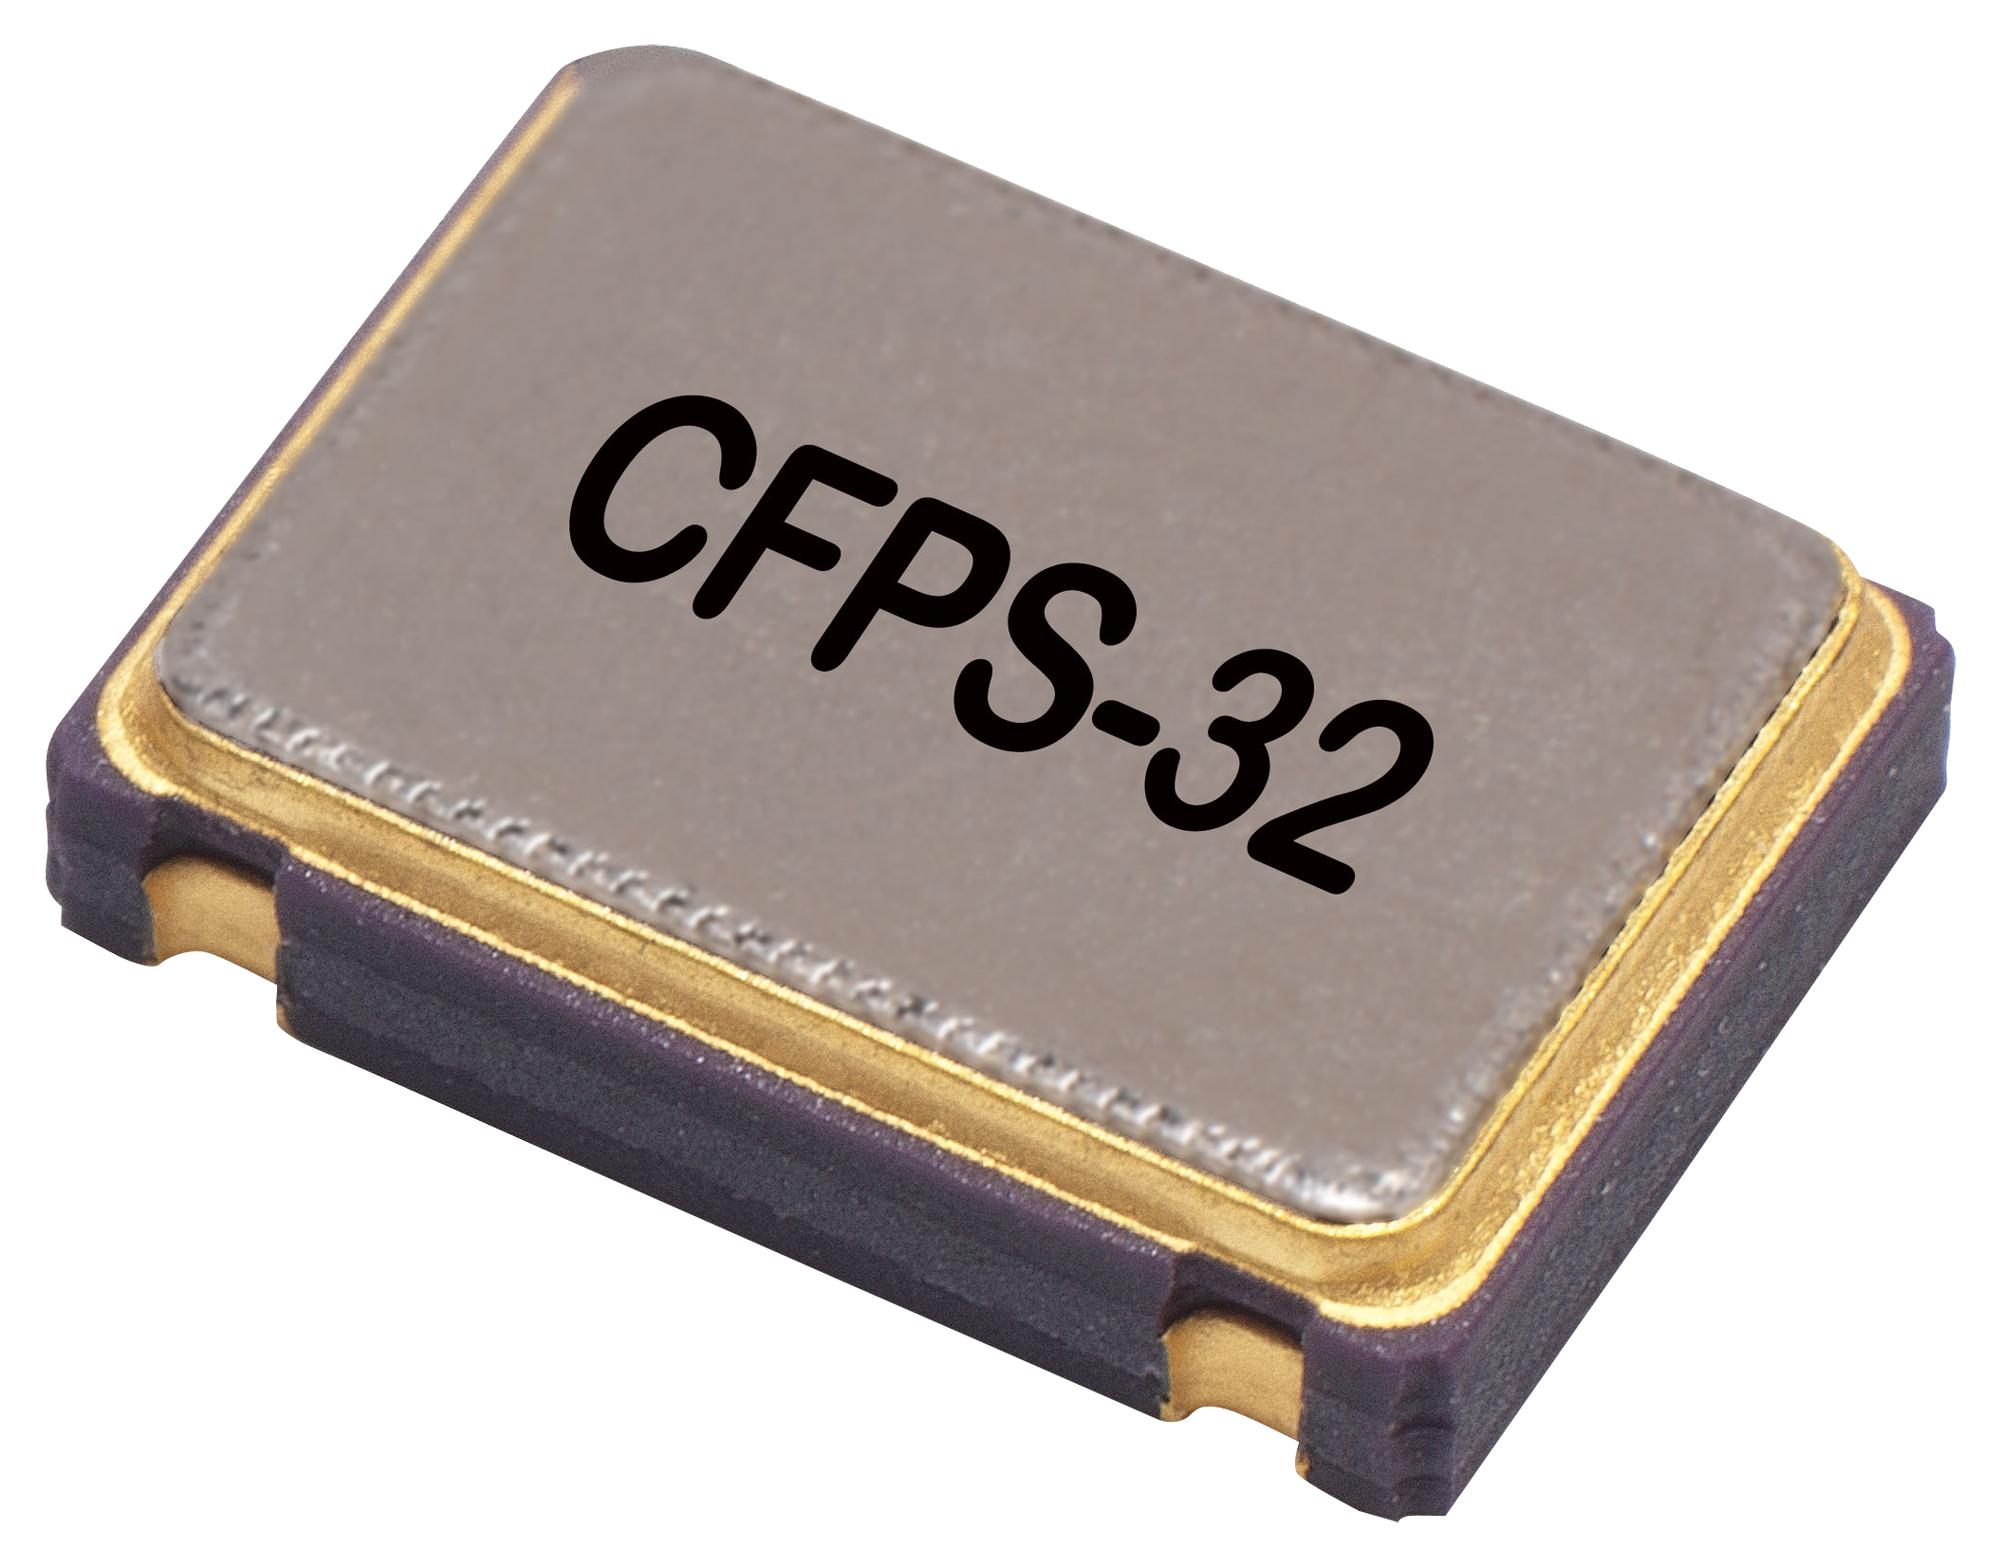 LFSPXO025225 CRYSTAL OSCILLATOR, SMD, 25MHZ IQD FREQUENCY PRODUCTS